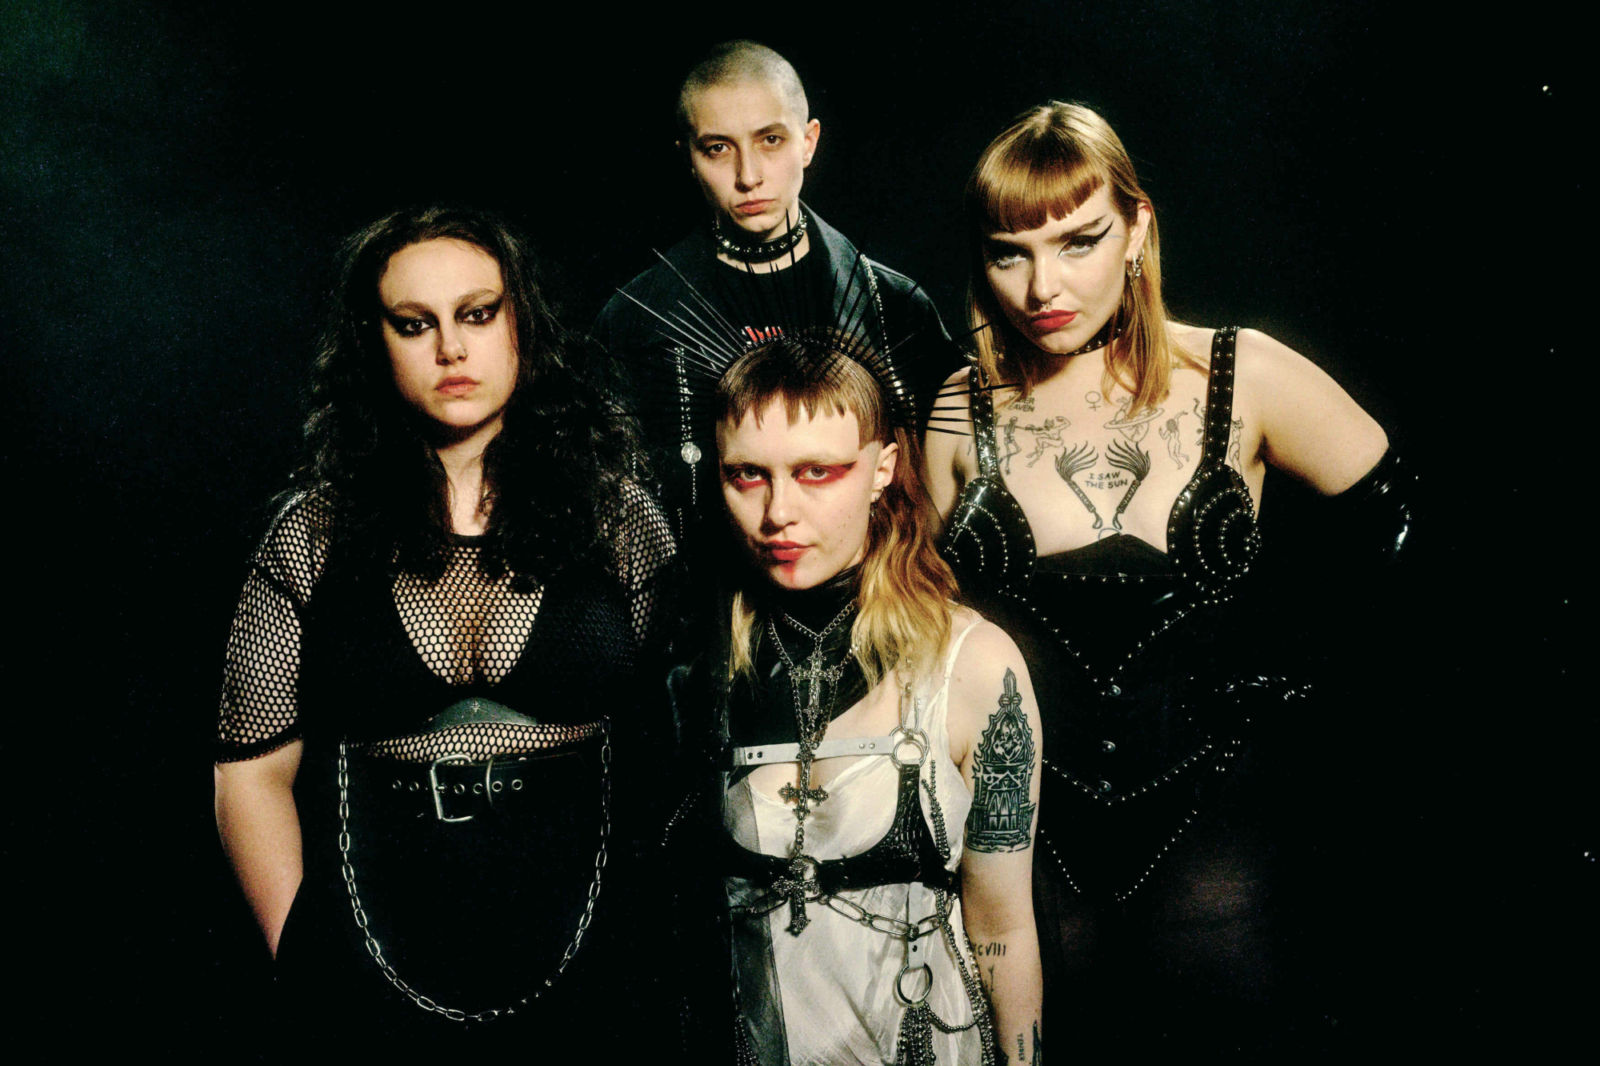 Witch Fever: "We want people to feel empowered by the album”